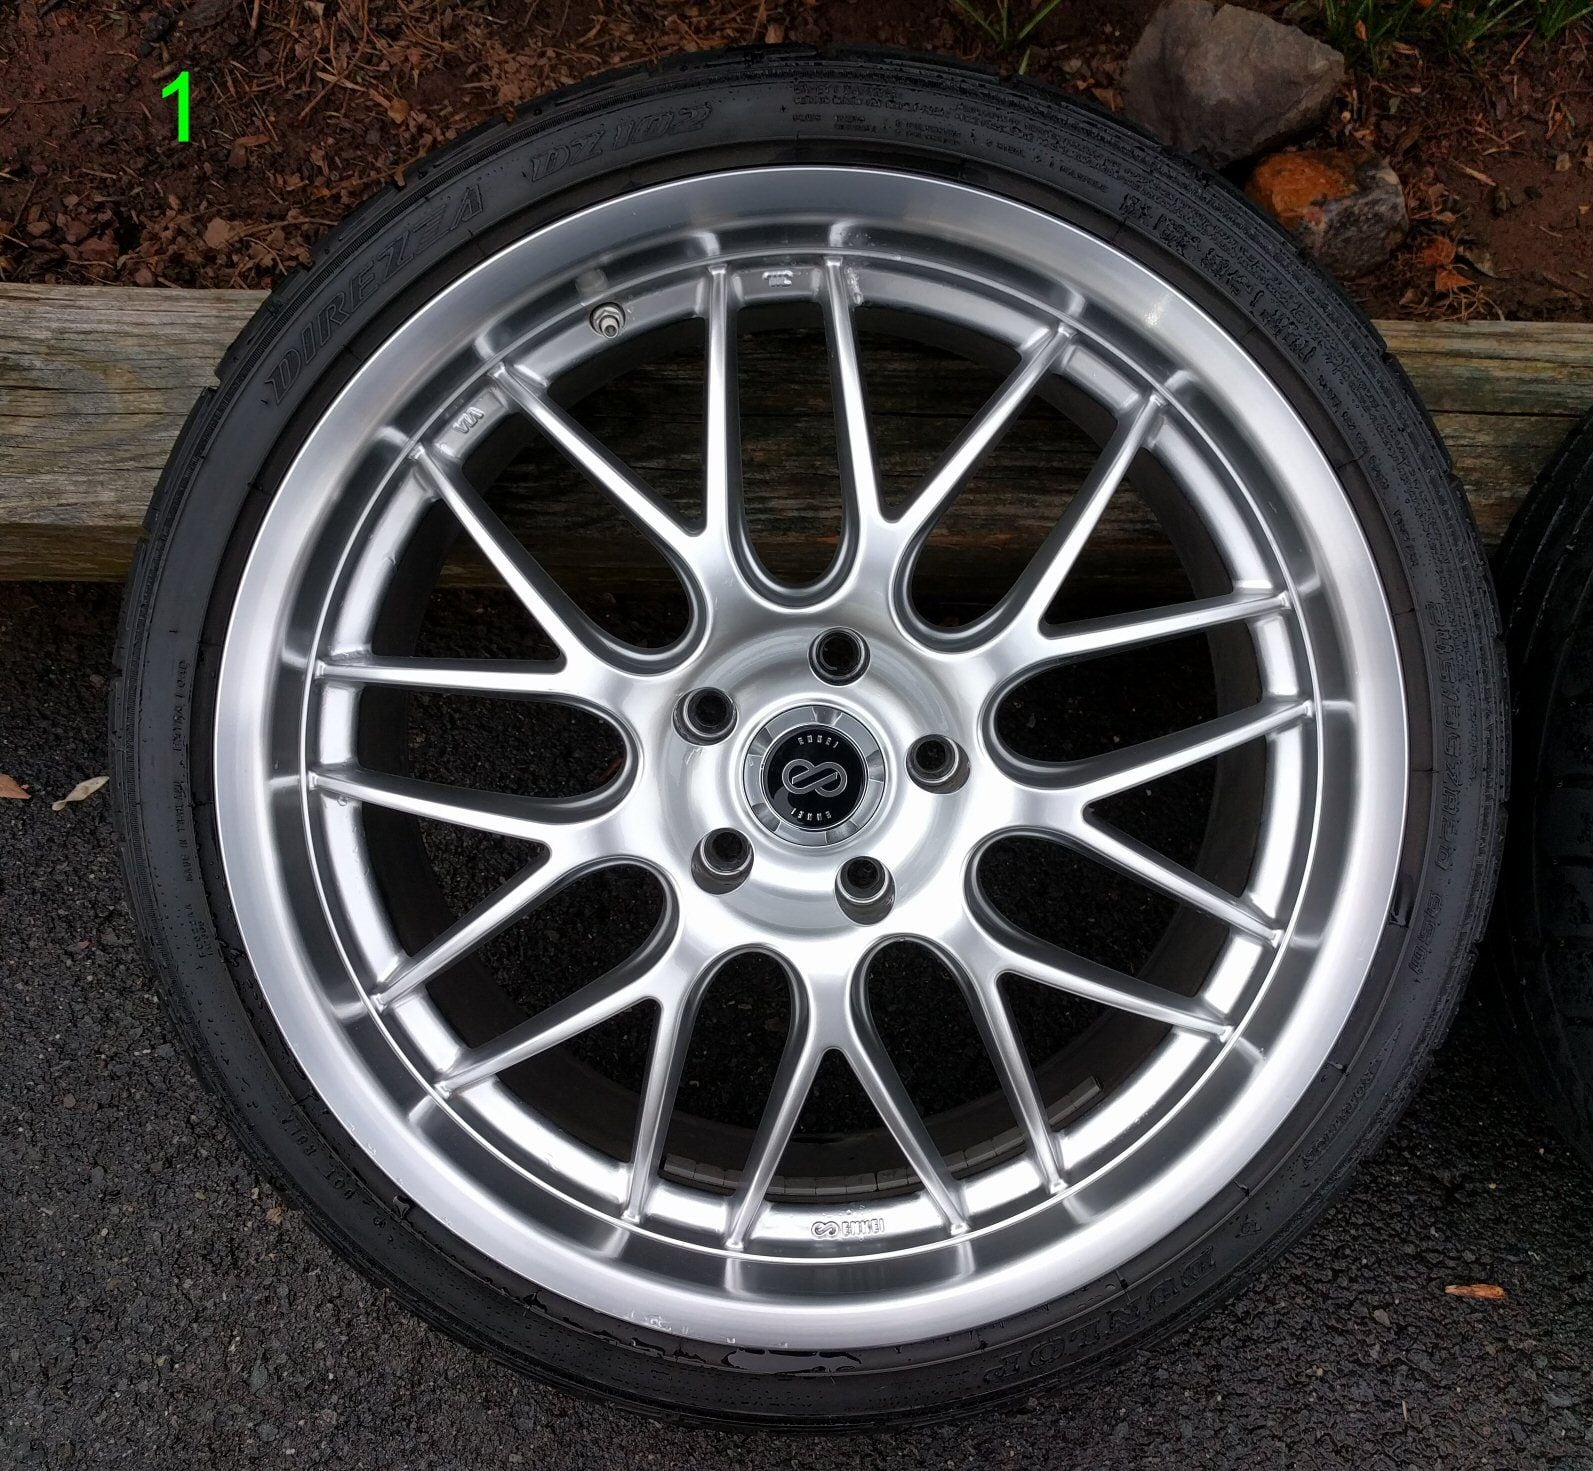 Wheels and Tires/Axles - EXPIRED: 20"x8.5"+40 5x120 EnkeiLussoSilver+245/35/20 Dunlop Direzza DZ102+TPMS+Parts - Used - 2009 to 2014 Acura TL - Morris County, NJ 07936, United States